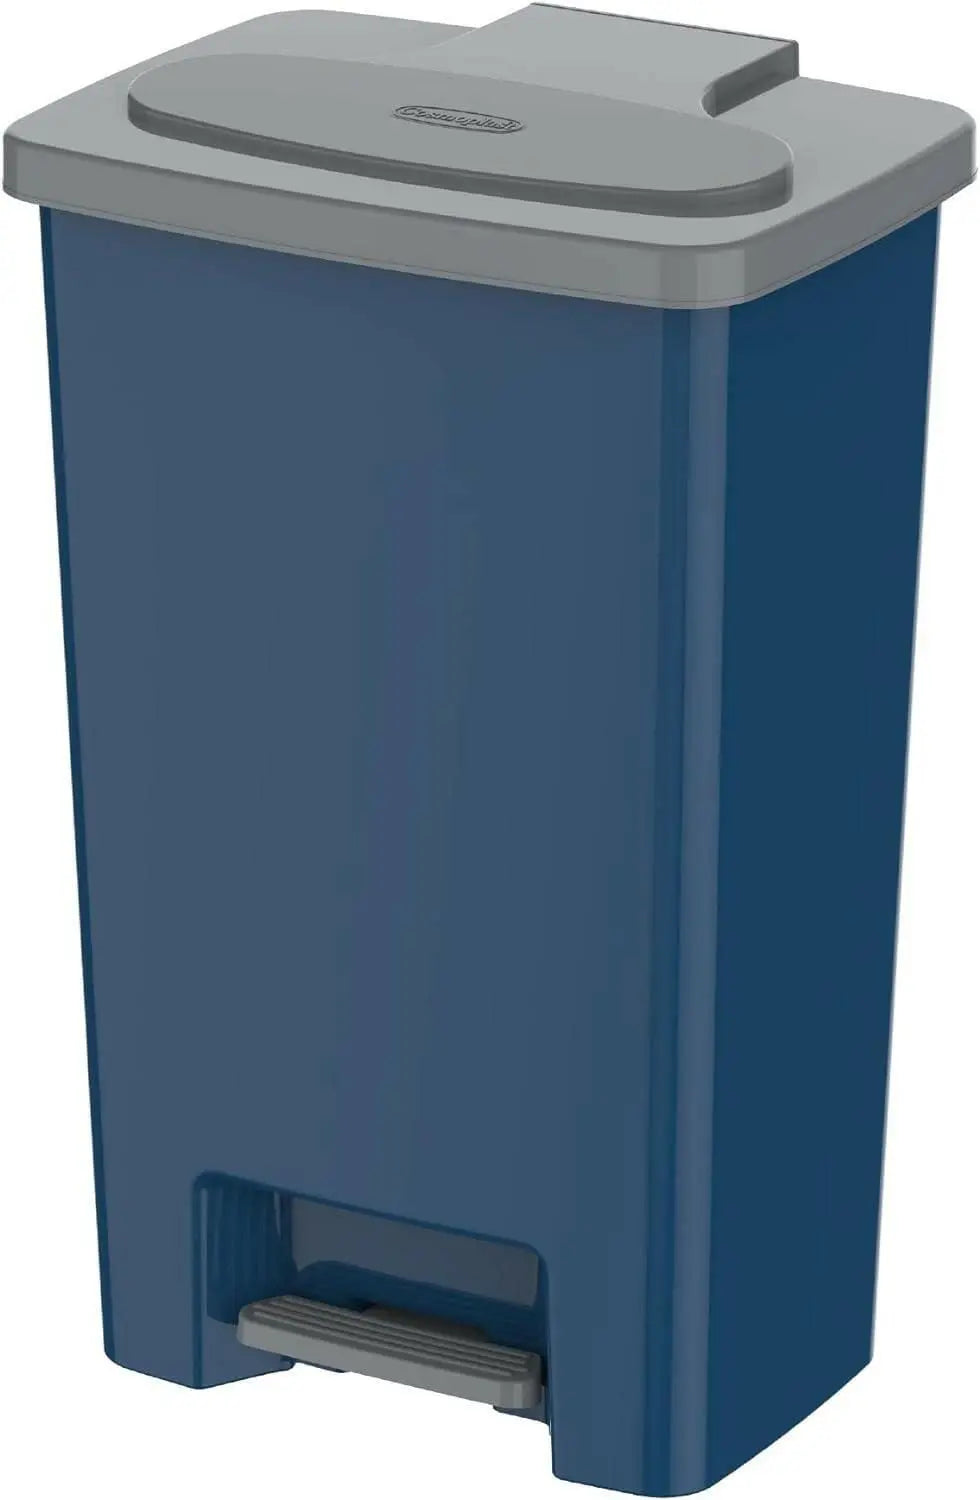 Cosmoplast, Step-On Waste Bin With Pedal,50 Liters,IFHHLA340PB